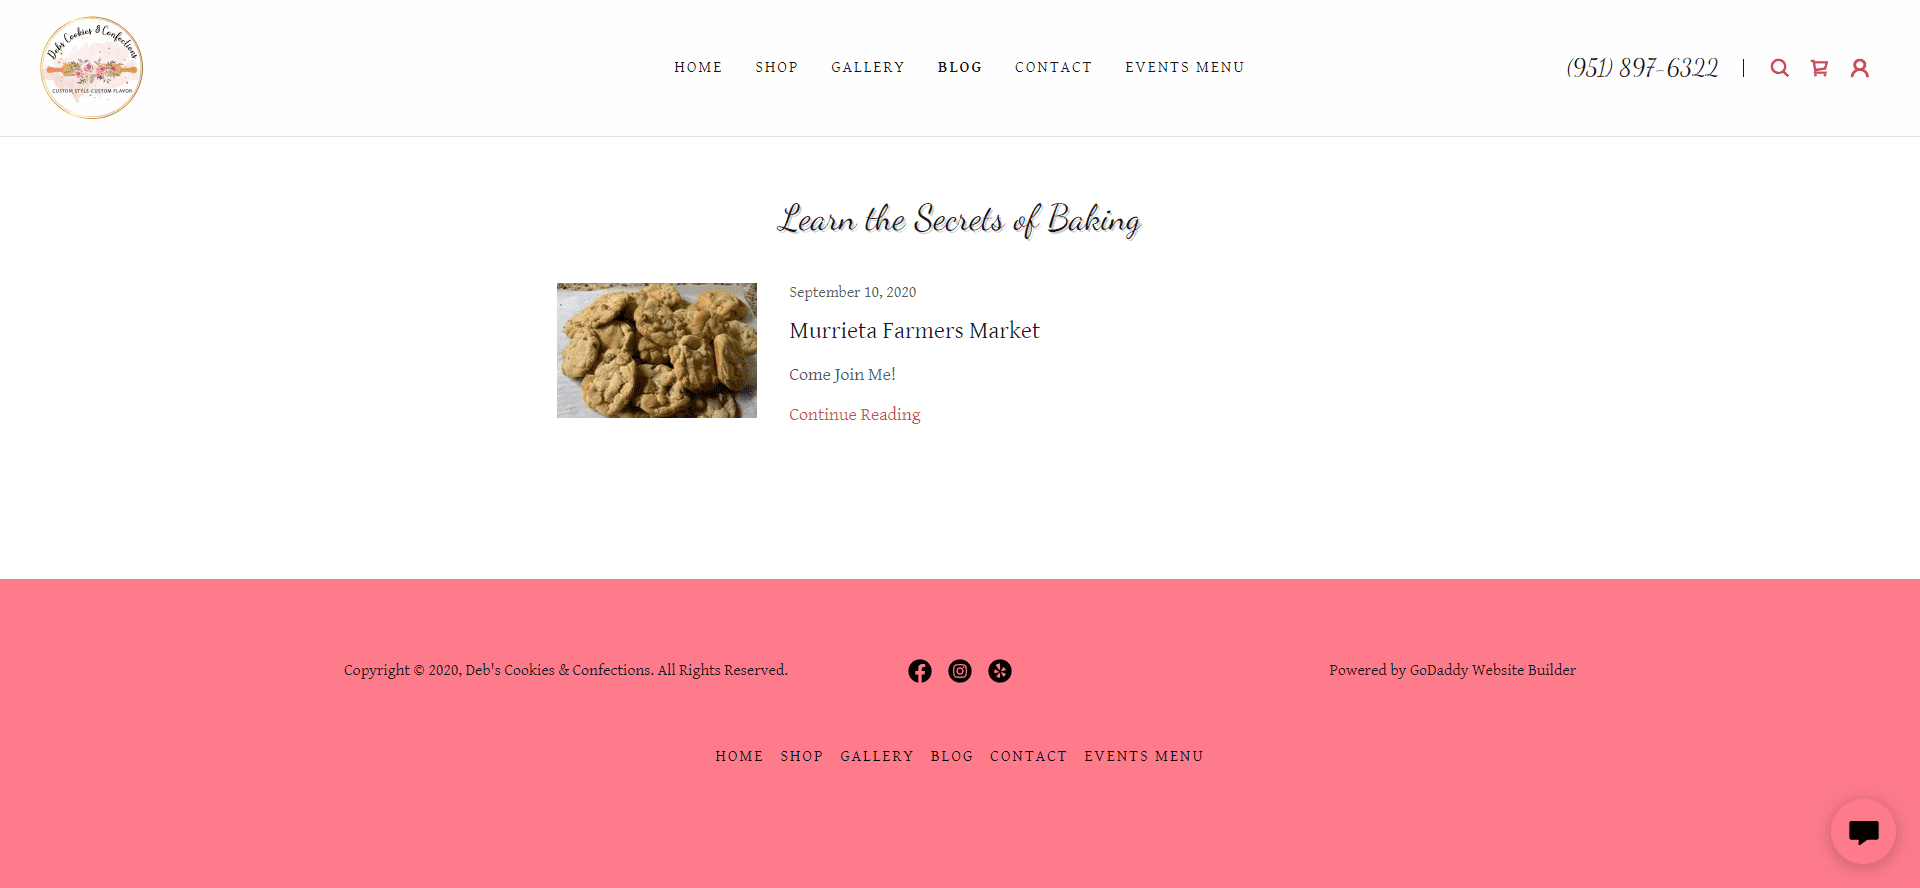 Deb's Cookies & Confections Blog Page